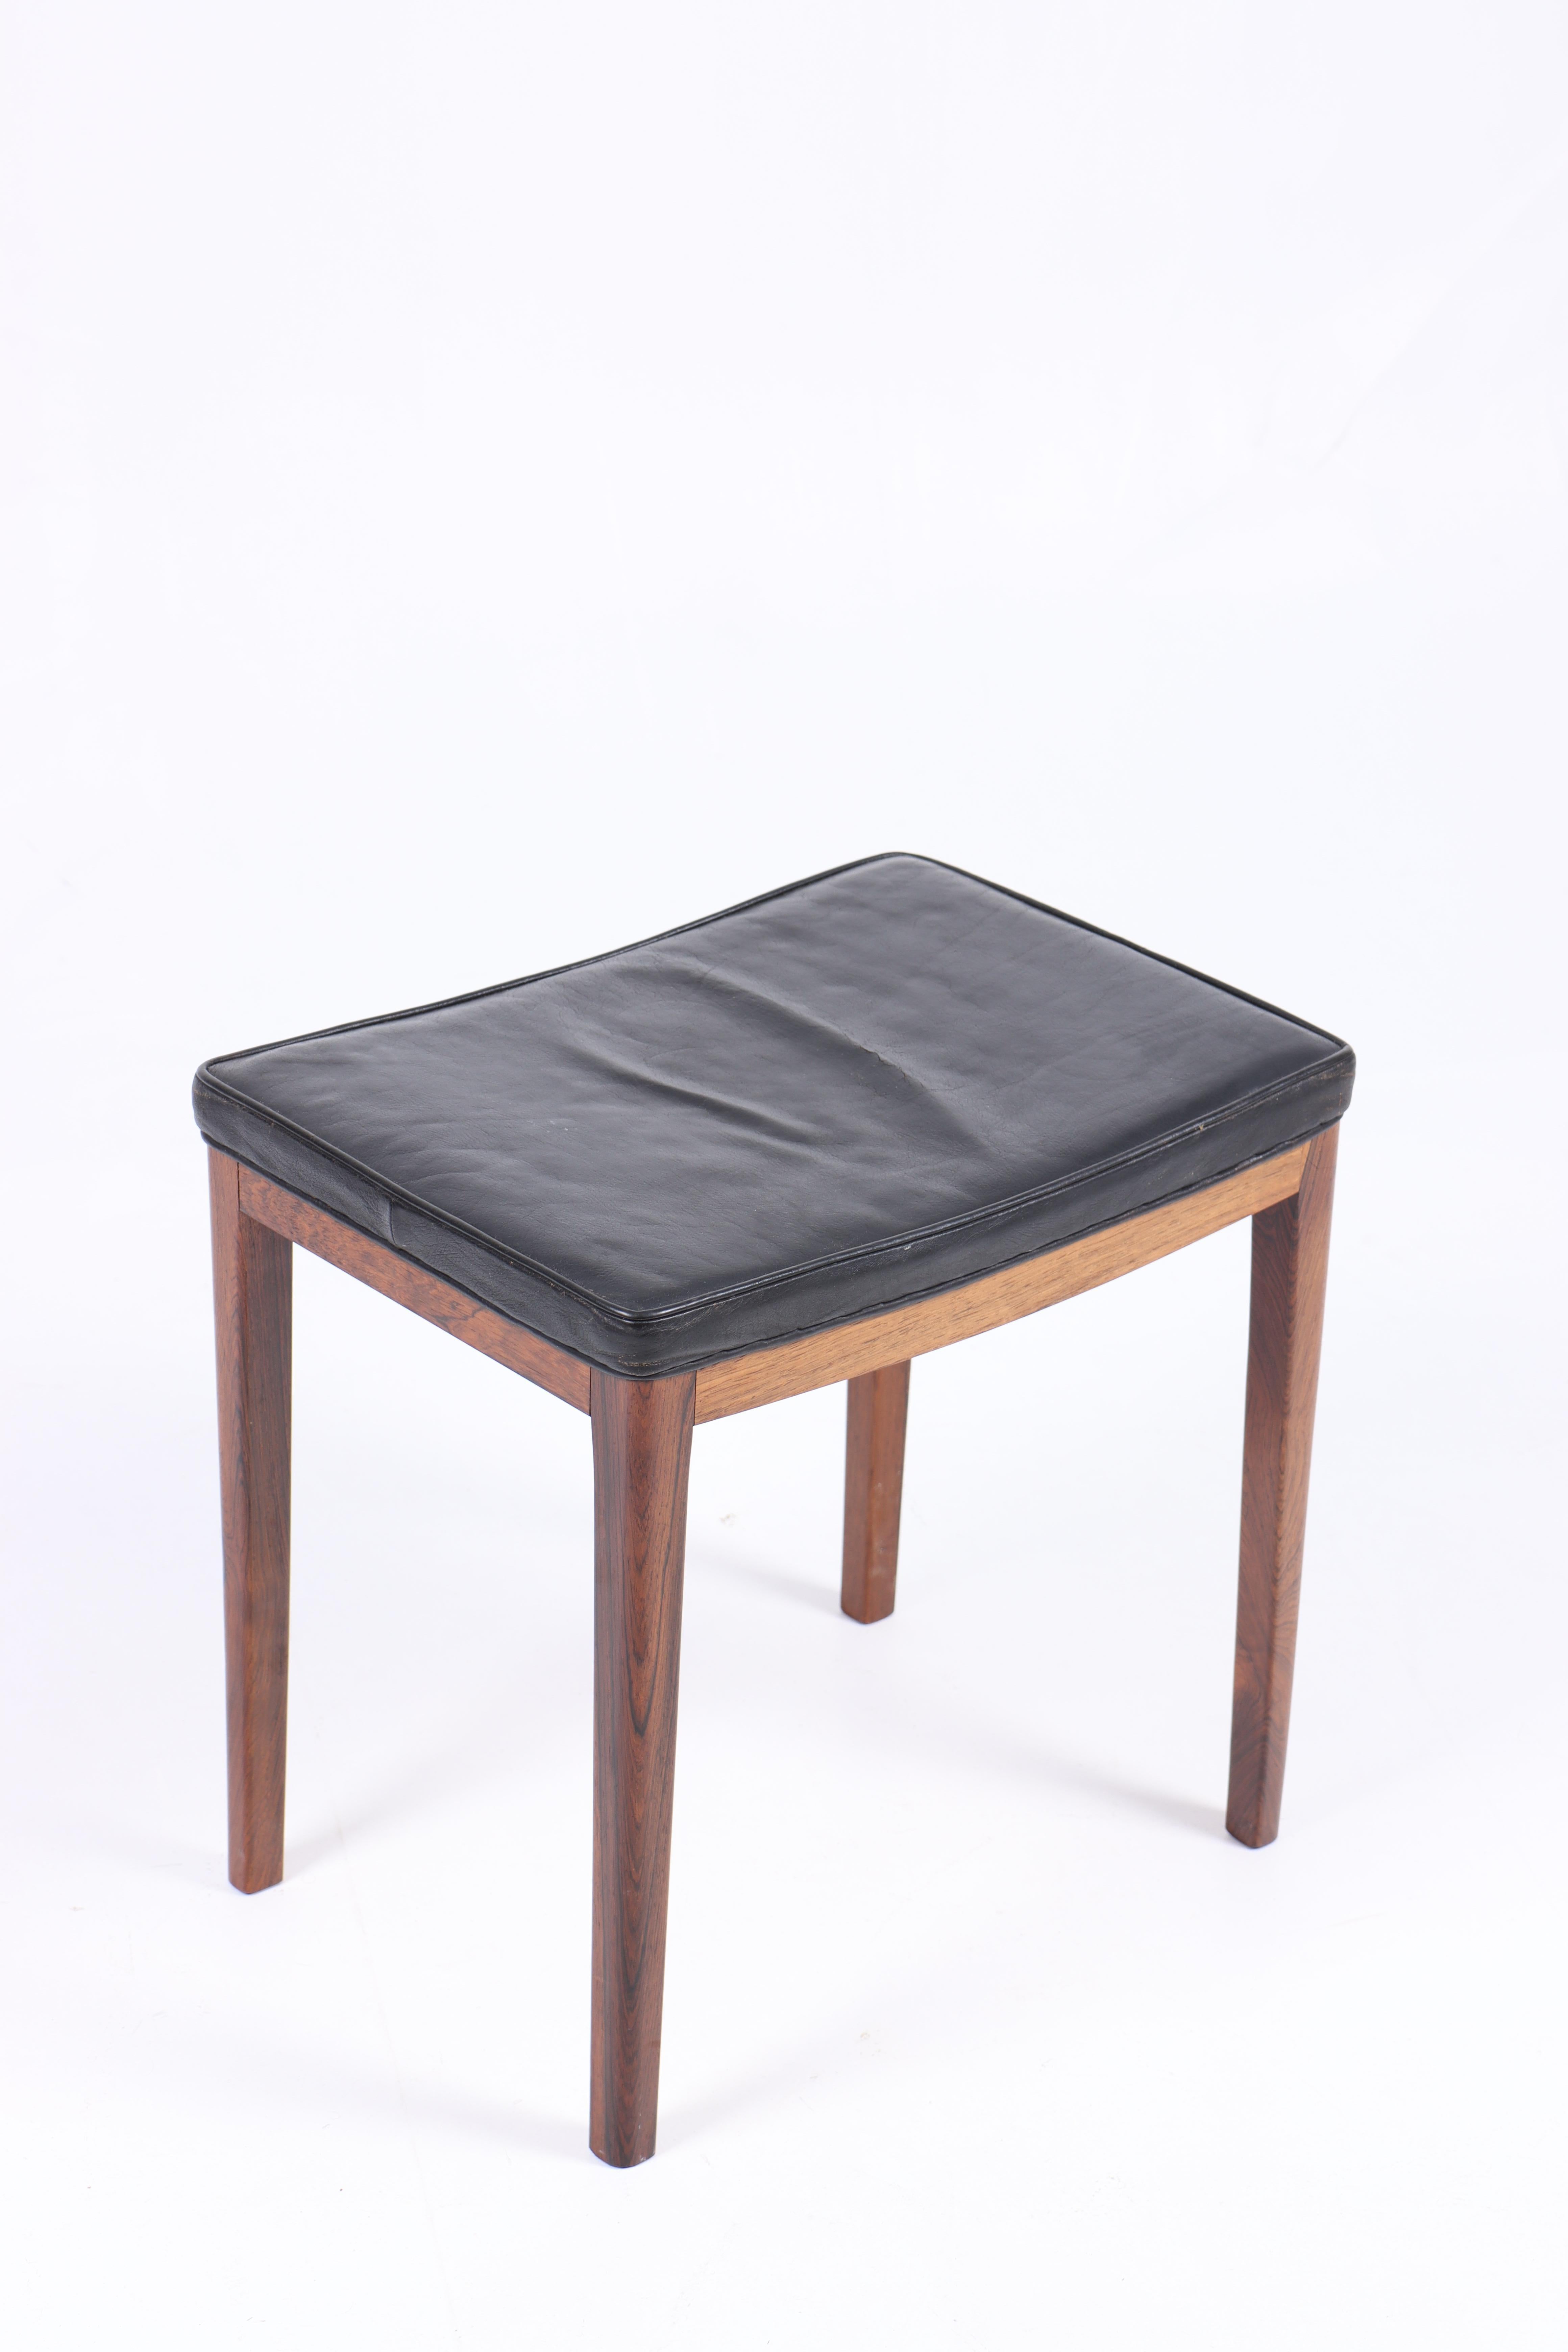 Danish Mid-Century Stool in Patinated Leather, Made in Denmark, 1960s For Sale